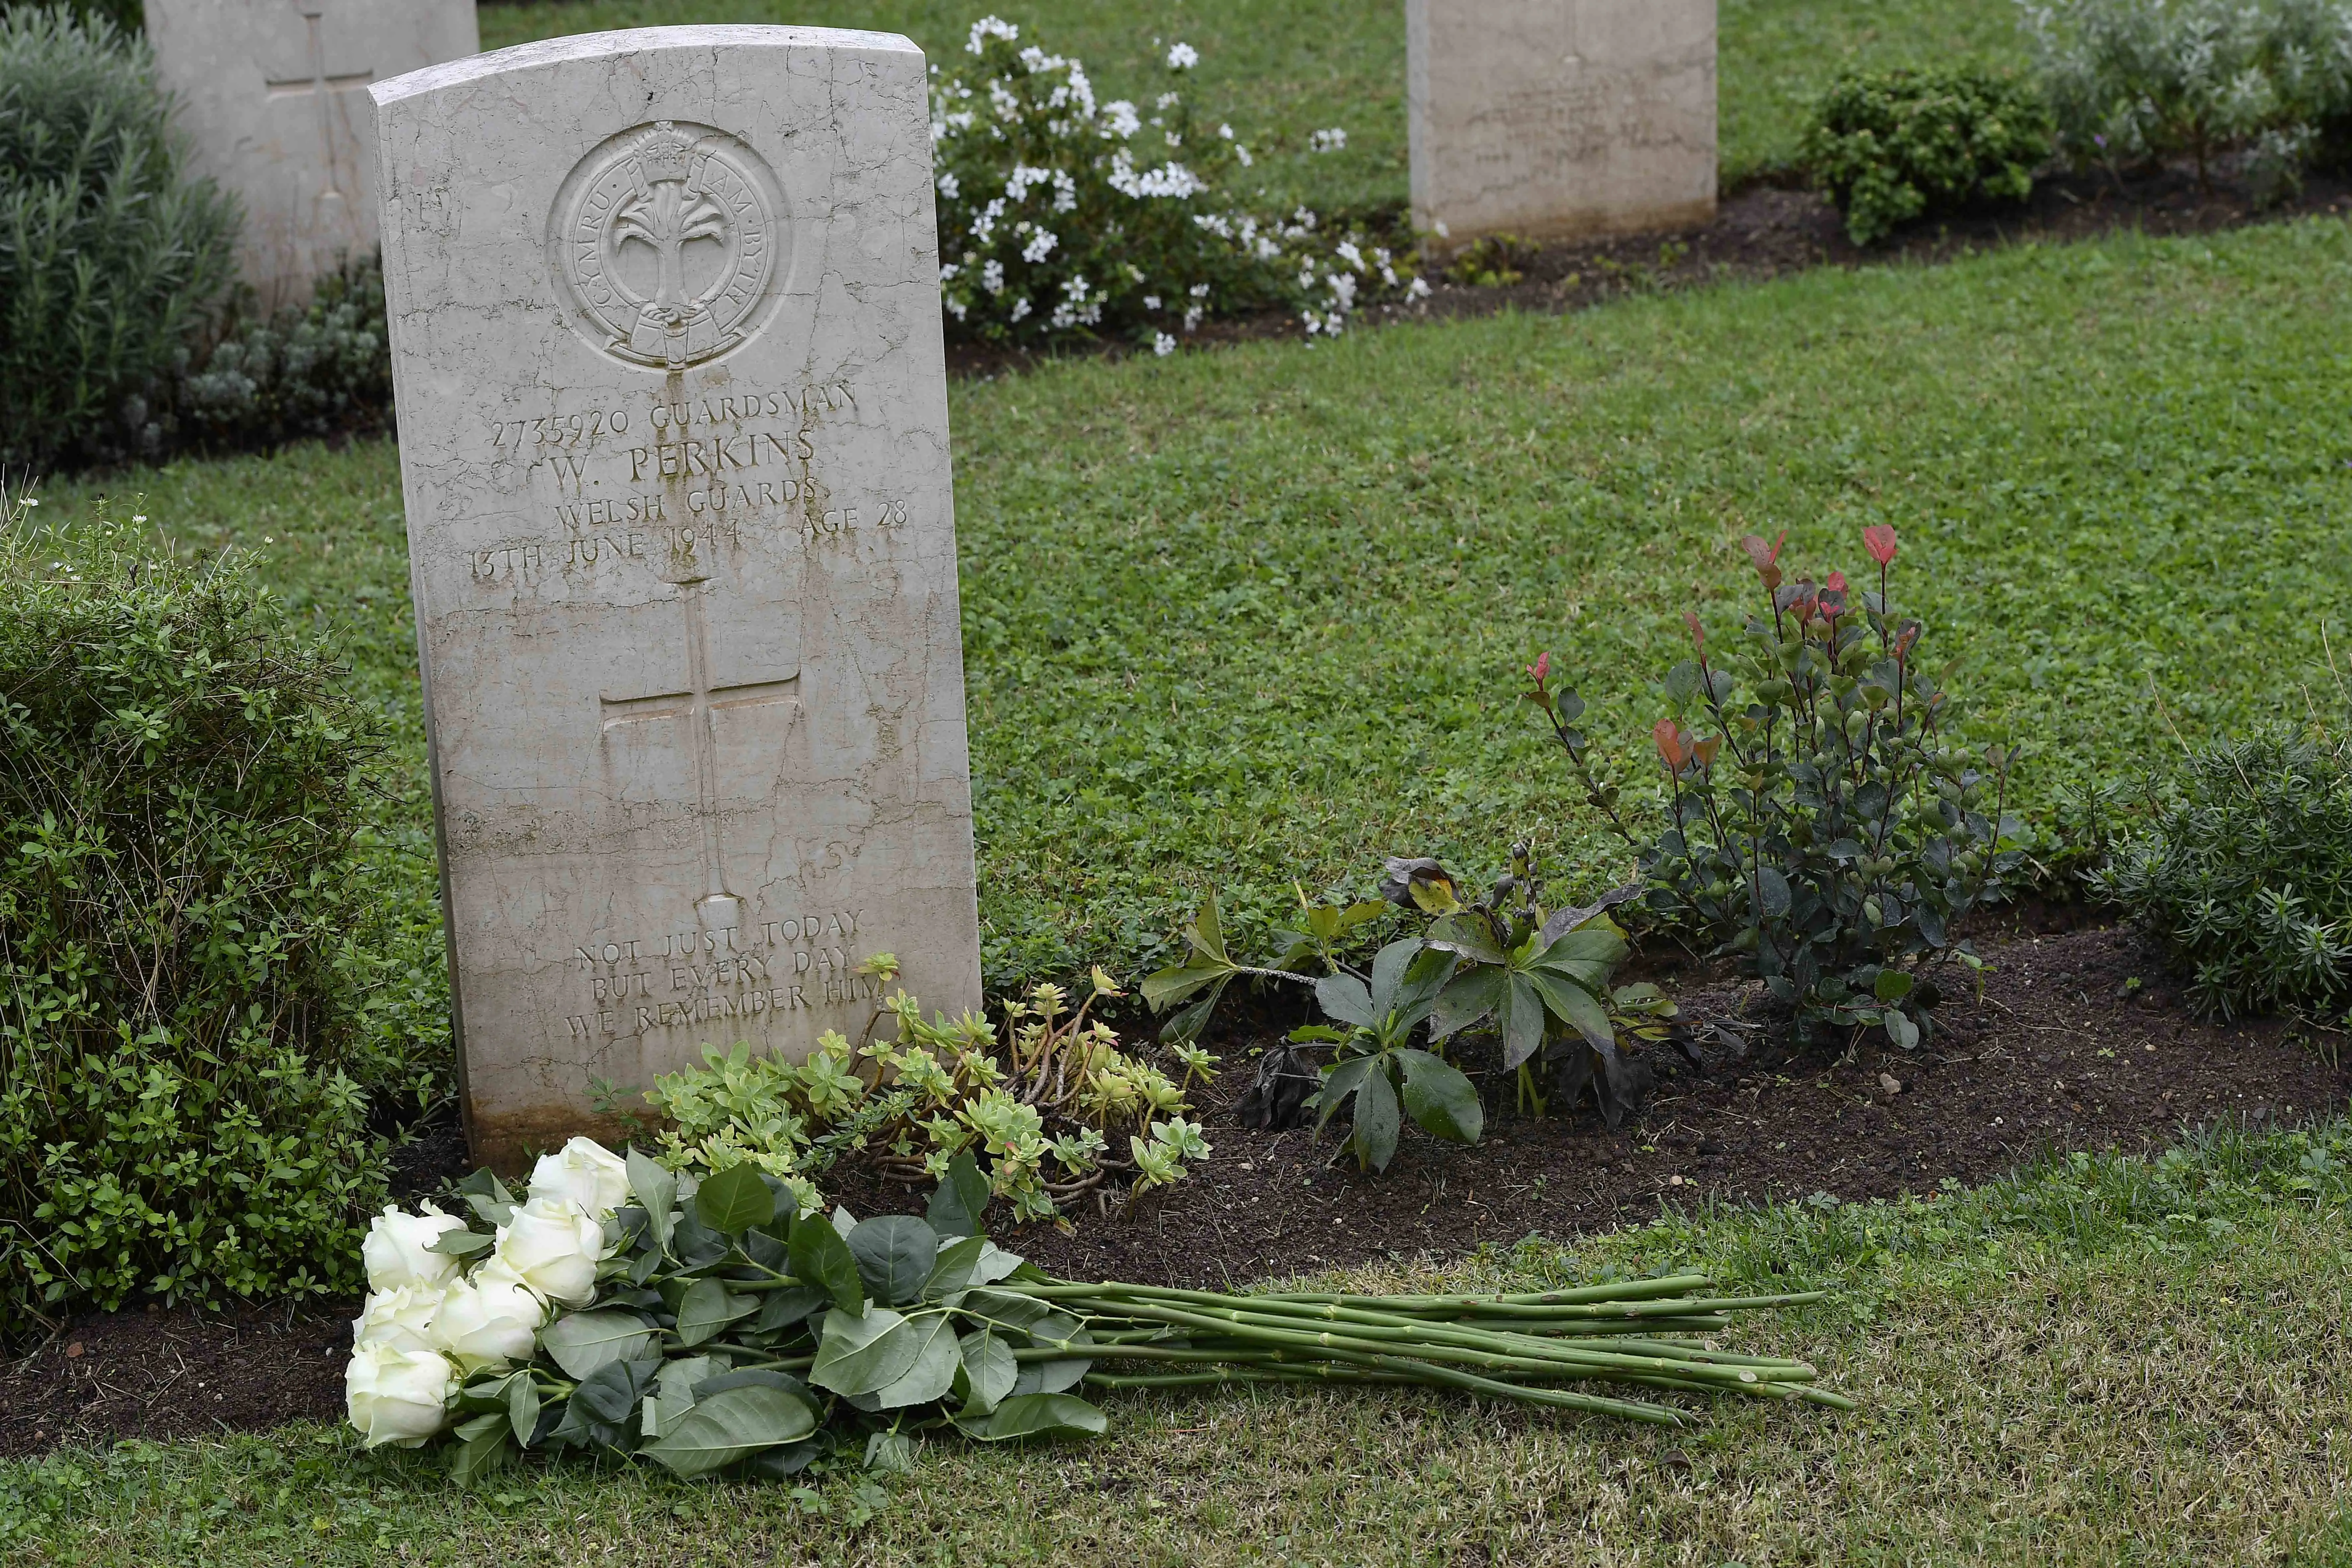 After Mass at the Rome War Cemetery on Nov. 2, 2023, Pope Francis placed white roses on some of the graves, including before the headstone of 28-year-old W. Perkins. Credit: Vatican Media